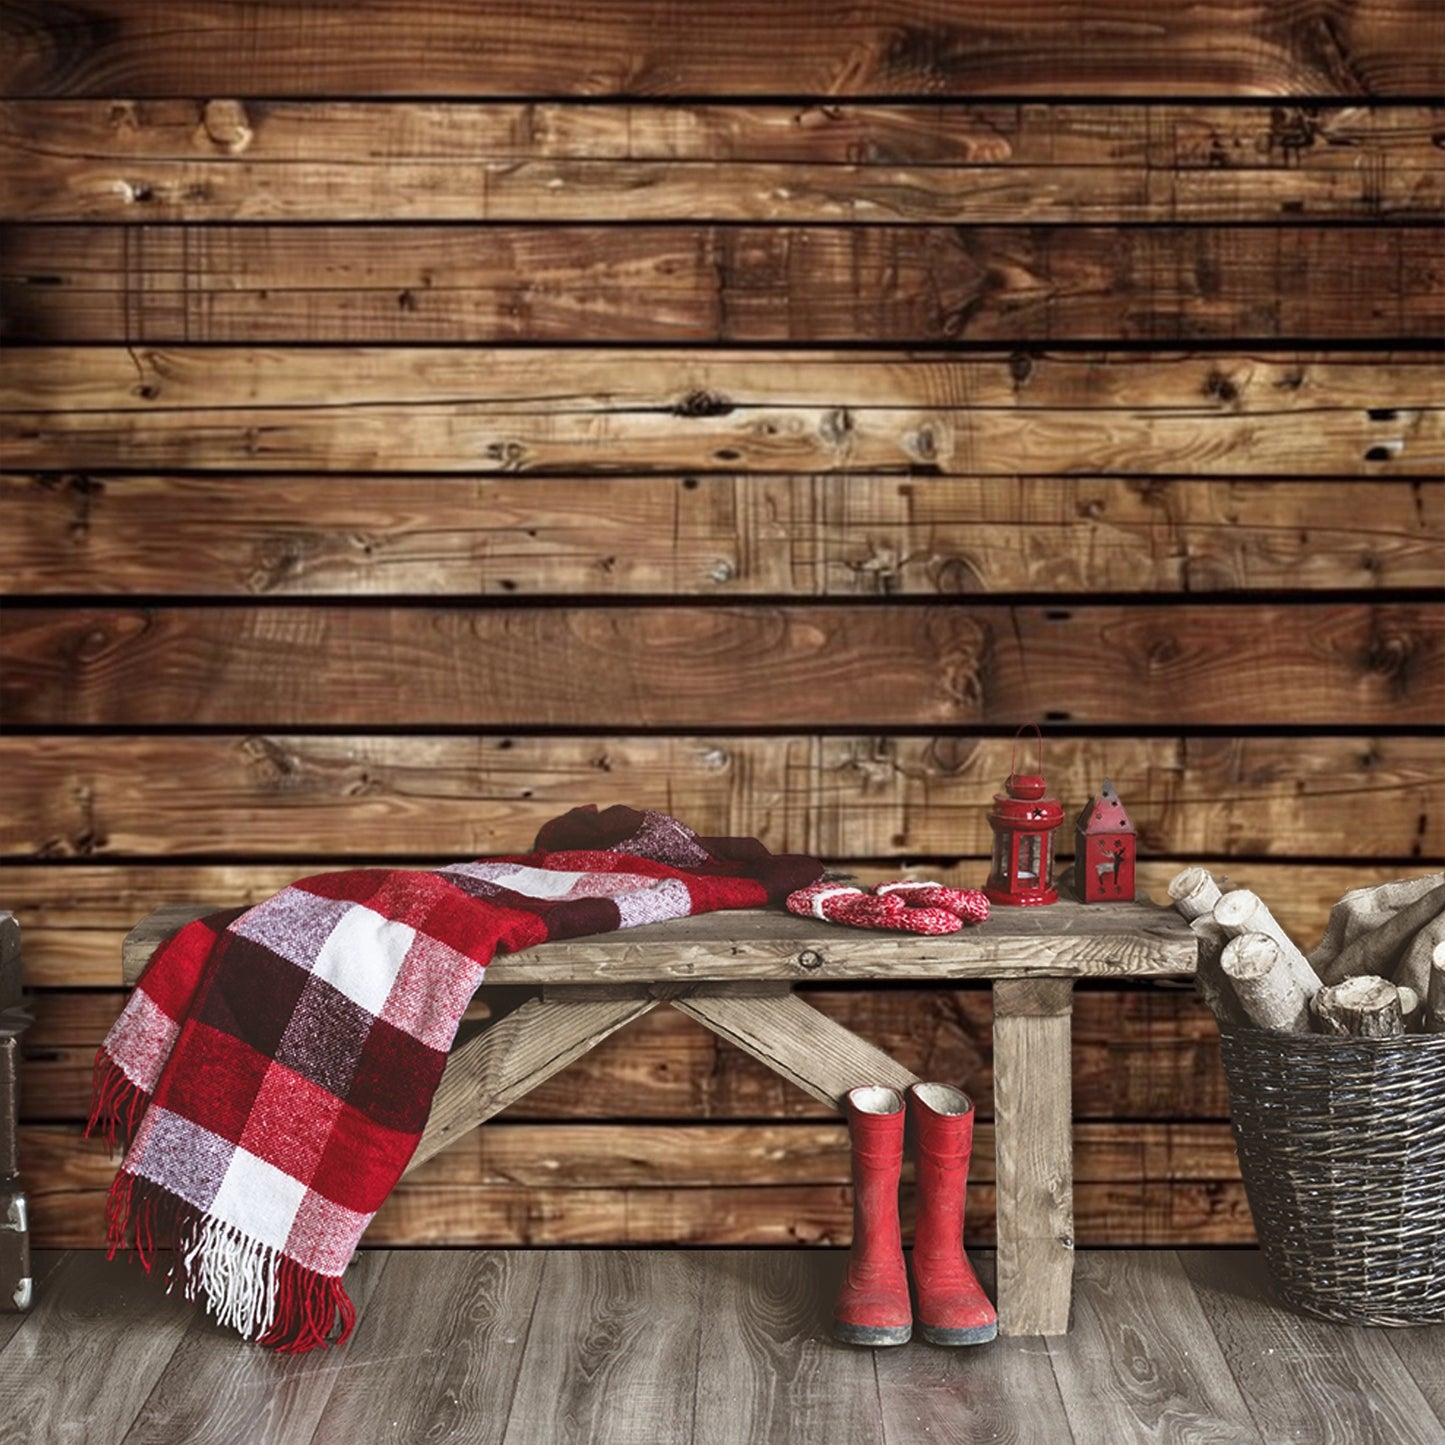 Rustic wooden bench with a red and white checkered blanket, red gloves, red boots, two red lanterns, and a basket of firewood set against the Wooden Boards Photography Wood Backdrop-ideasbackdrop by ideasbackdrop that evokes a nostalgic atmosphere.